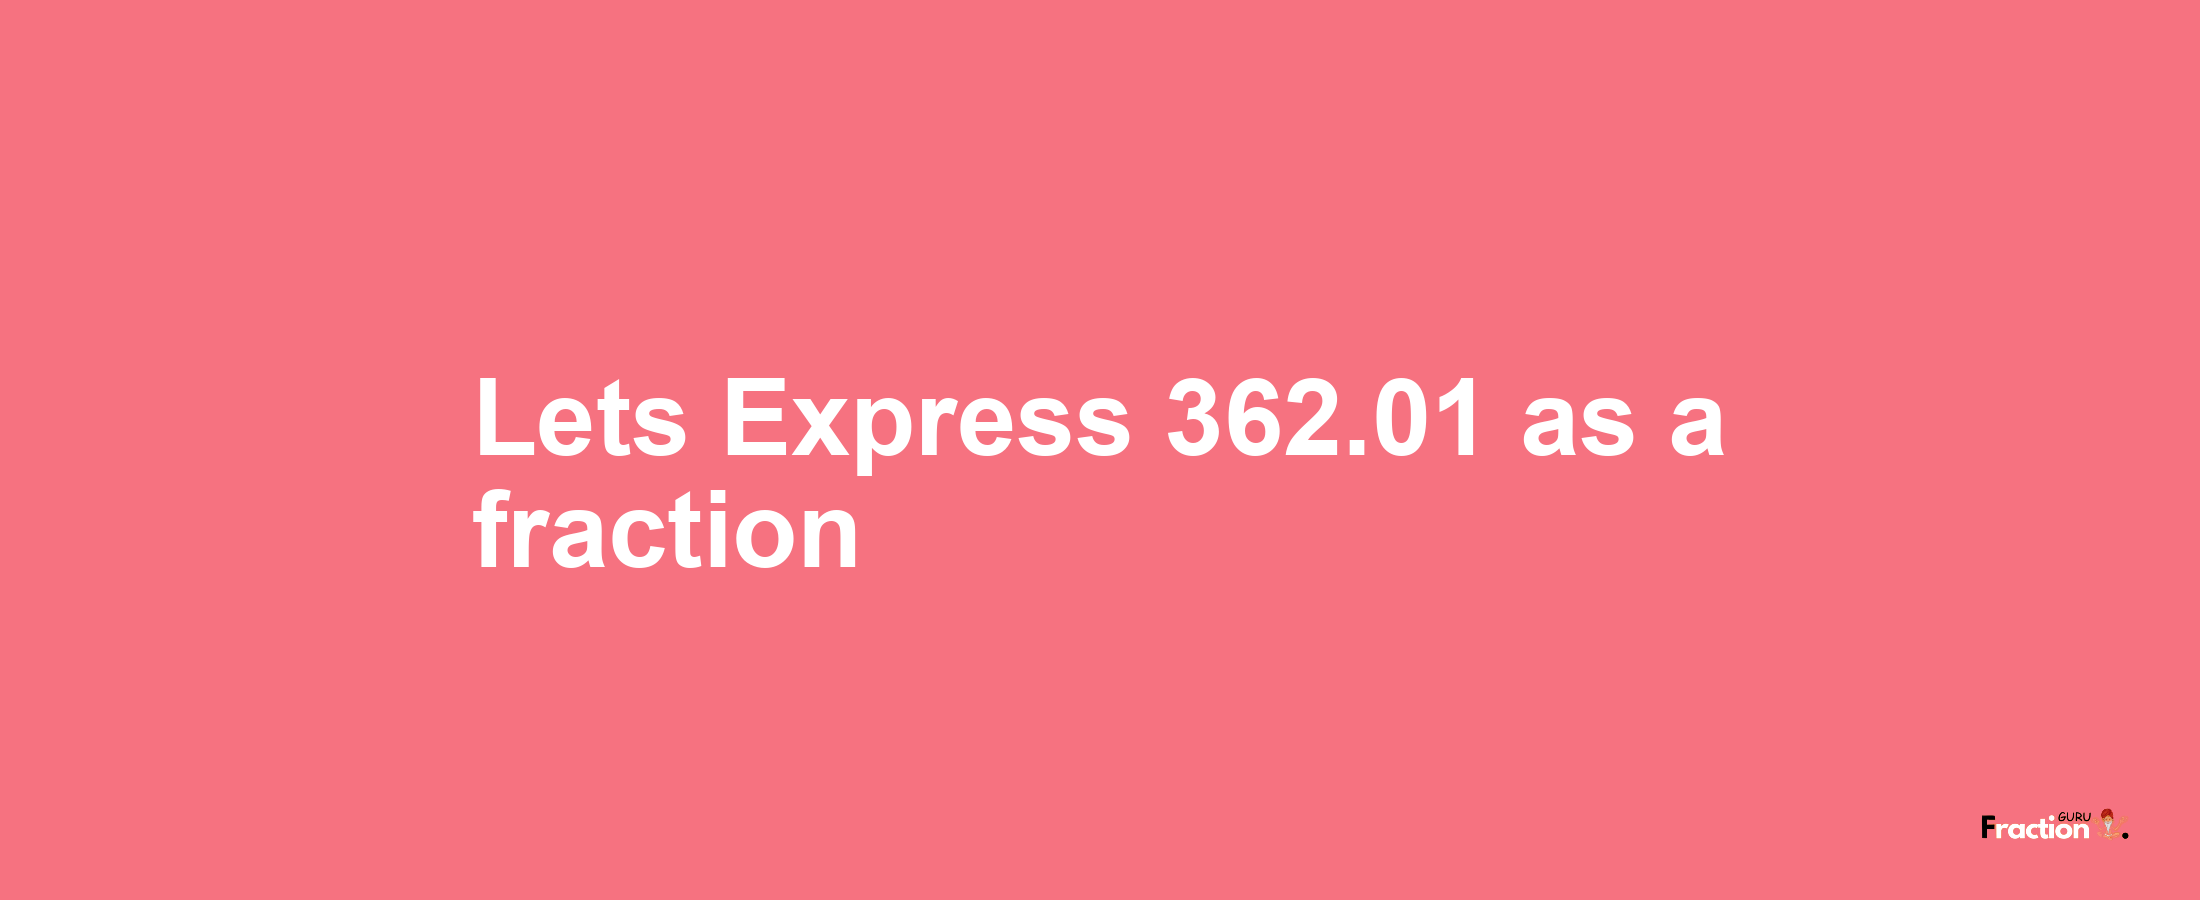 Lets Express 362.01 as afraction